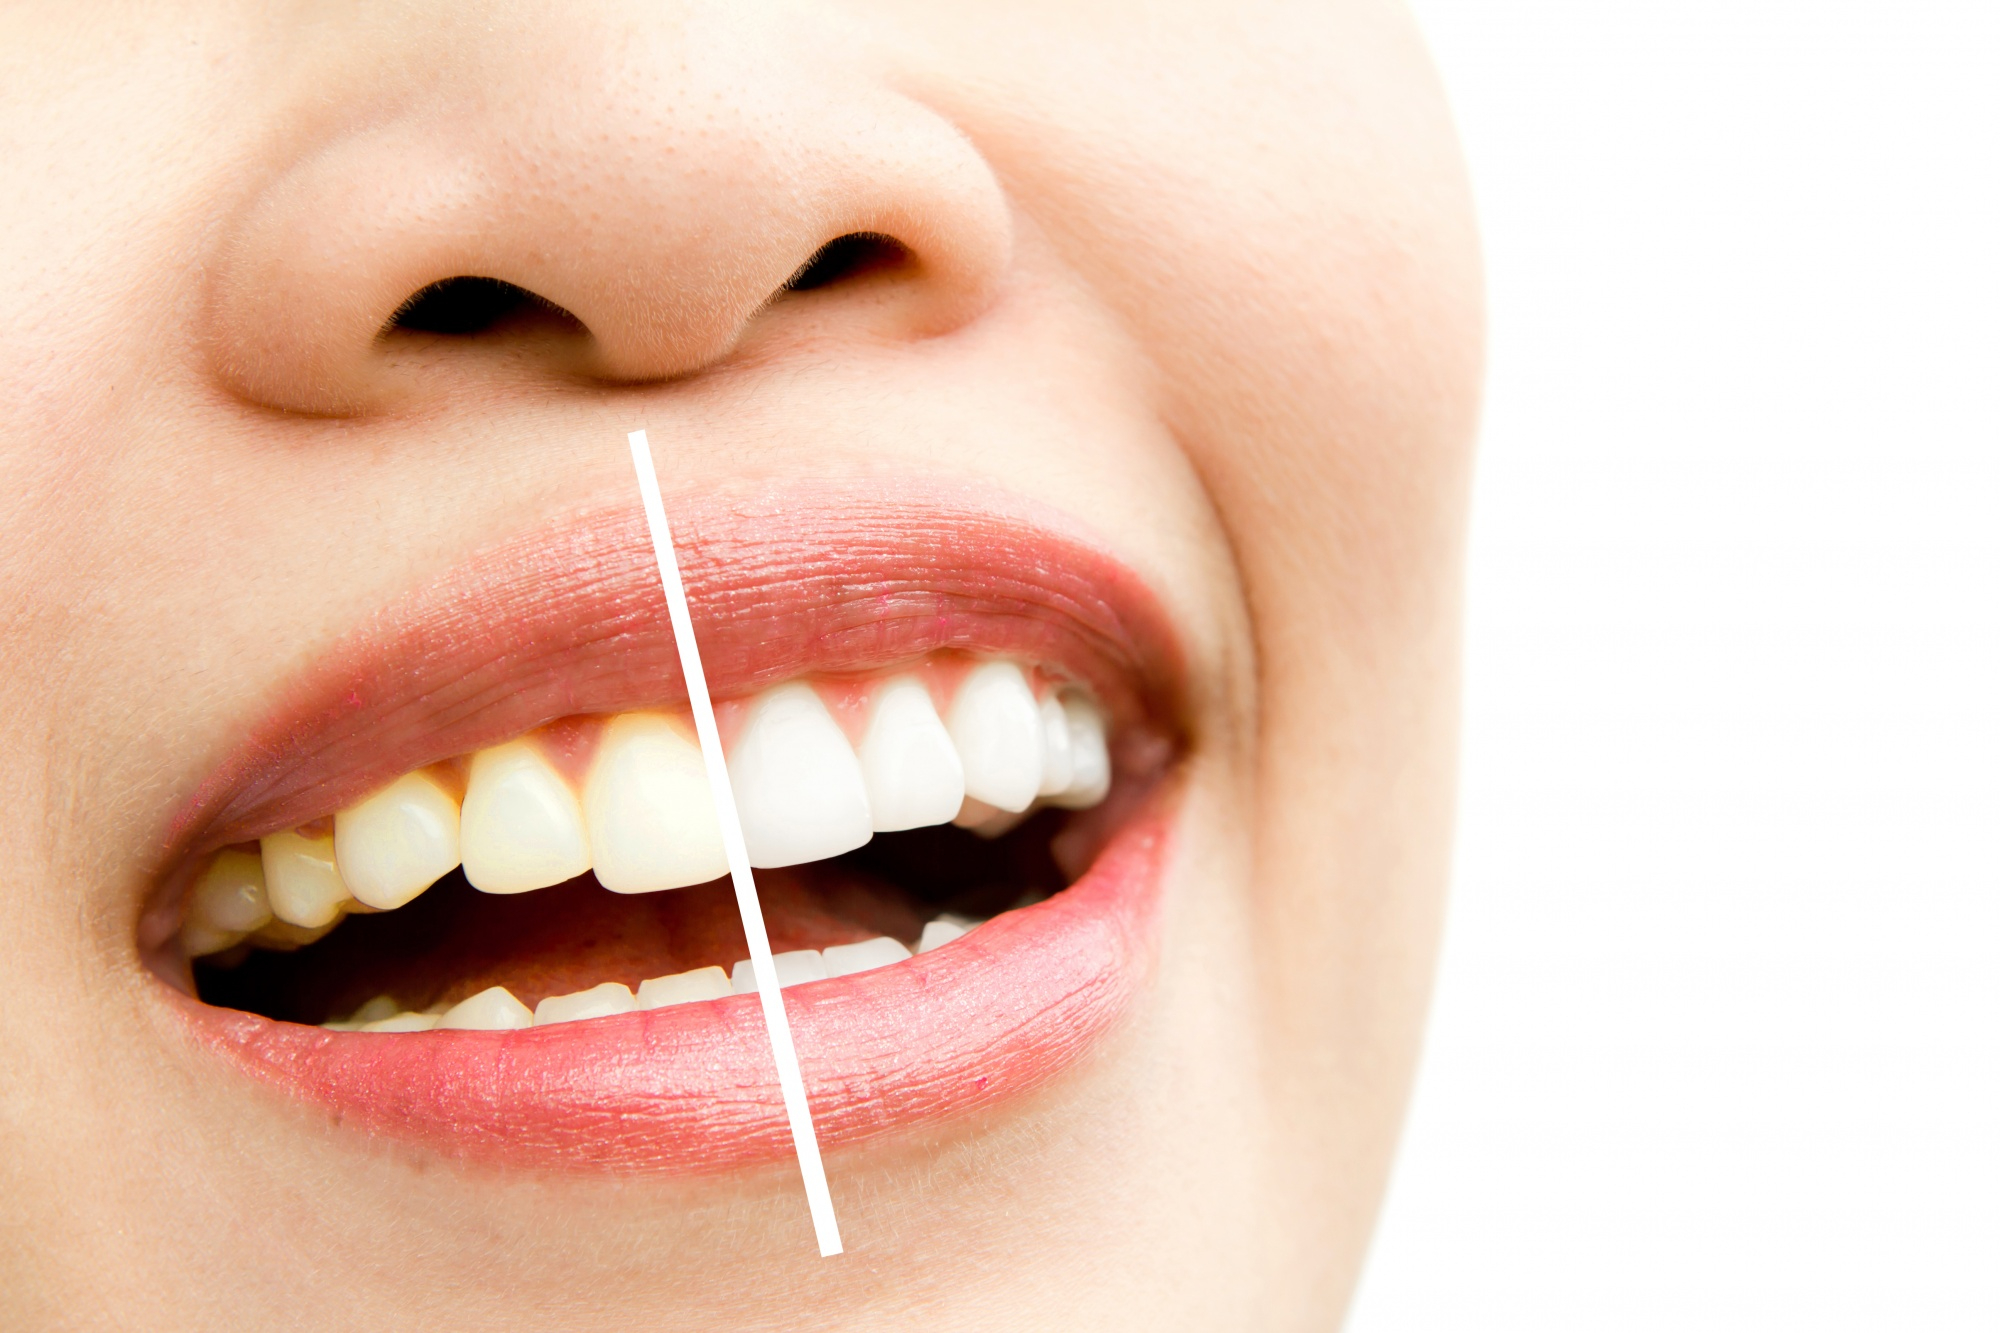 A young woman's set of teeth compared with a line that shows yellow and then perfectly white teeth